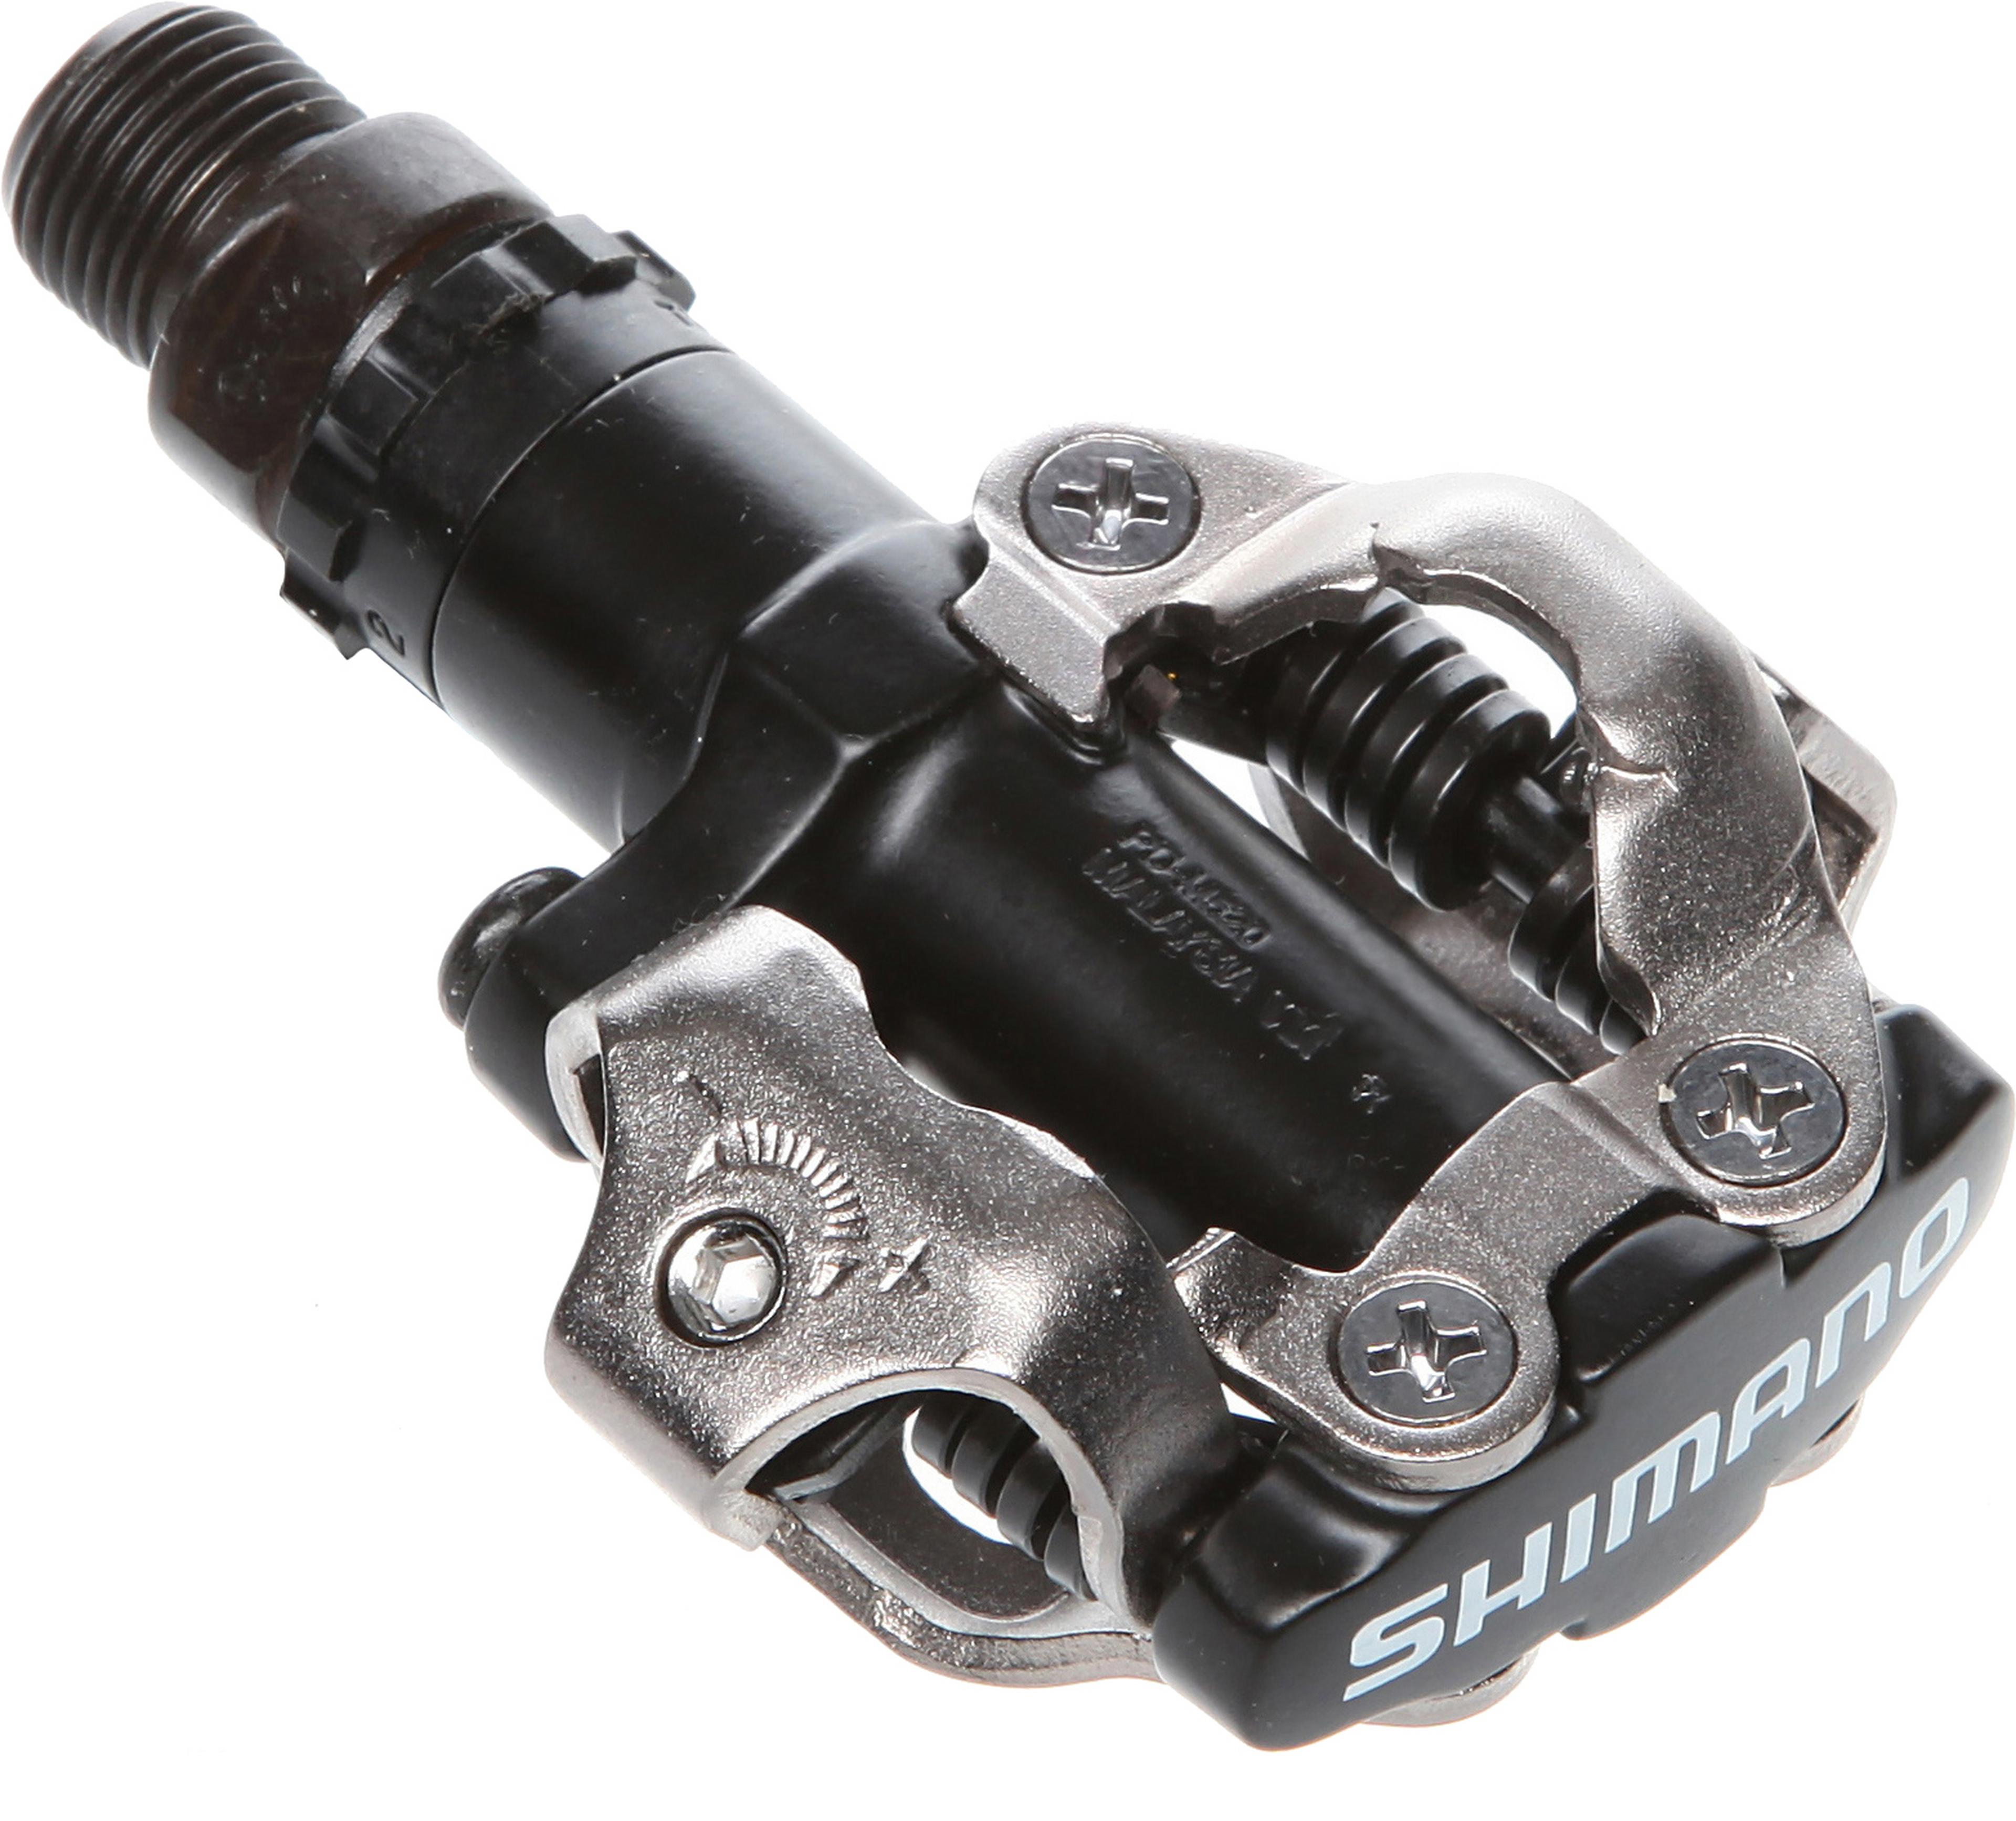 Shimano PD-M520 SPD MTB Clipless Pedals